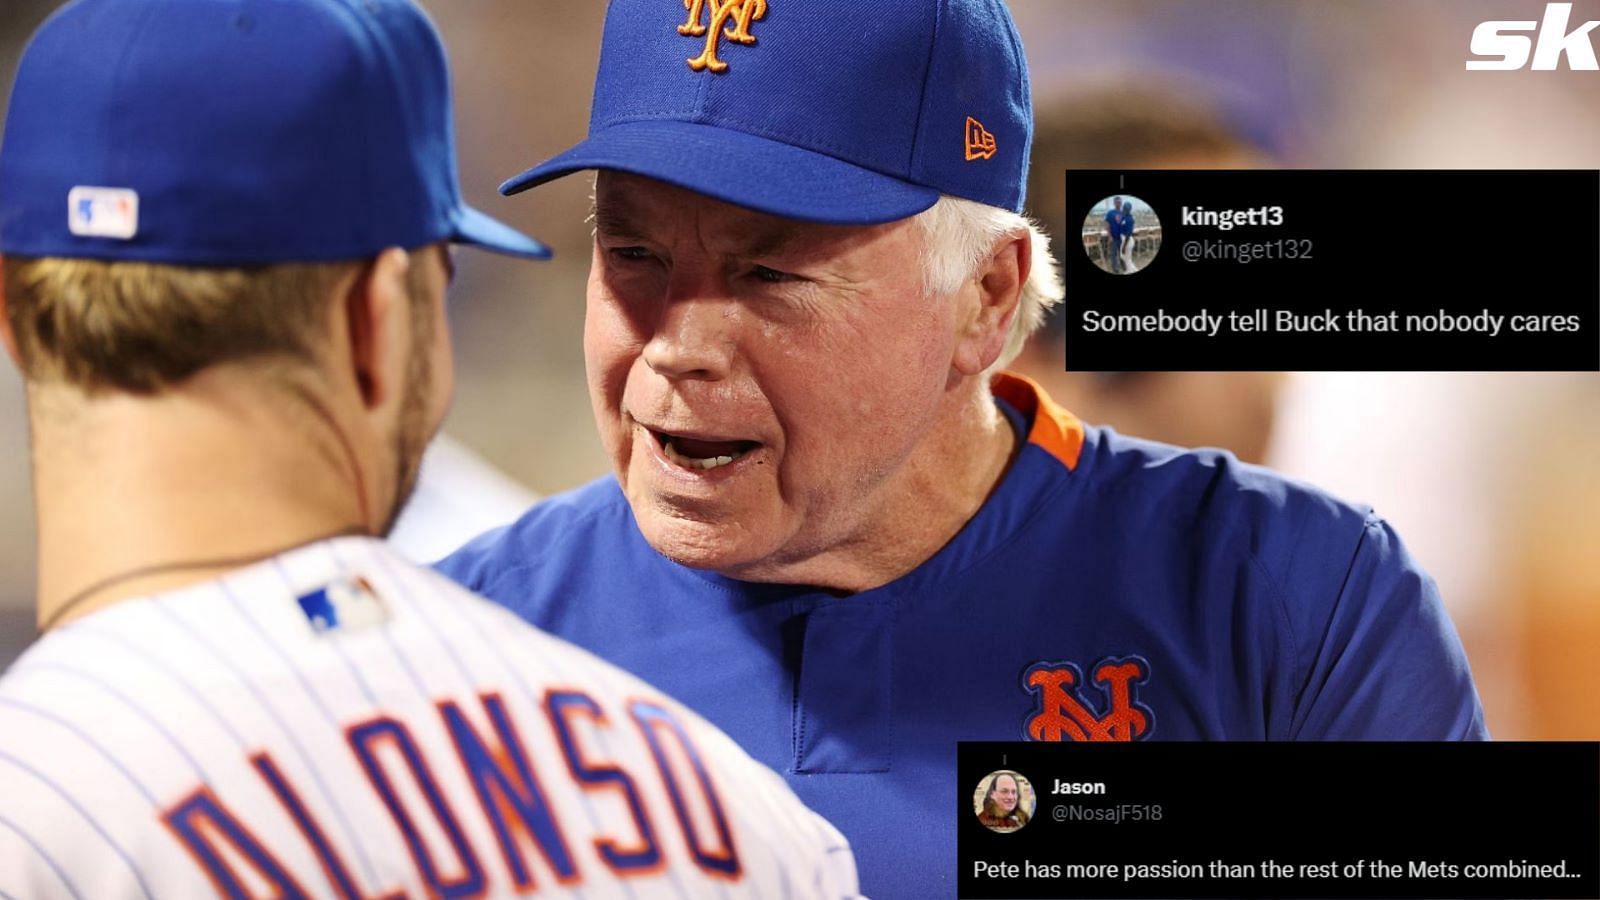 New York Mets manager Buck Showalter is not a fan of cursing